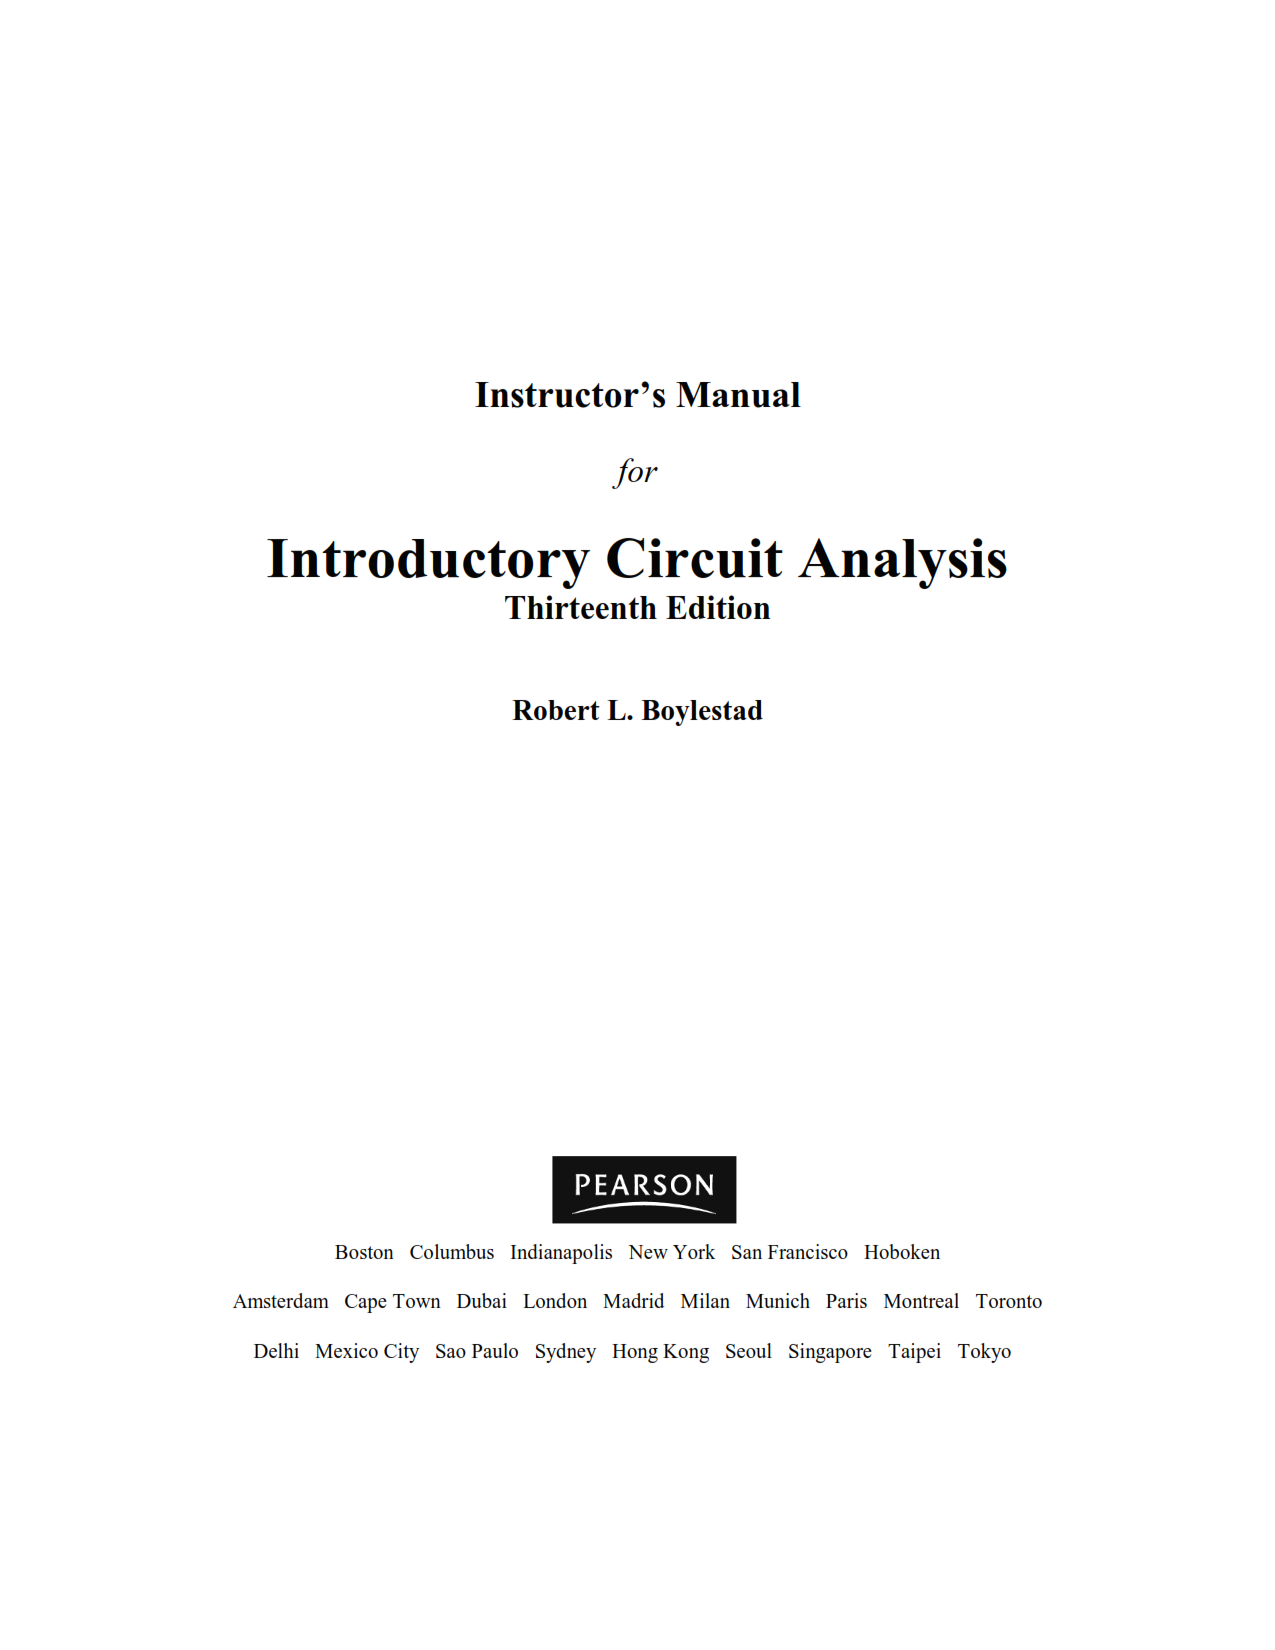 download free solution manual of Introductory Circuit Analysis 13th edition written by Boylestad , Robert L book in pdf format 